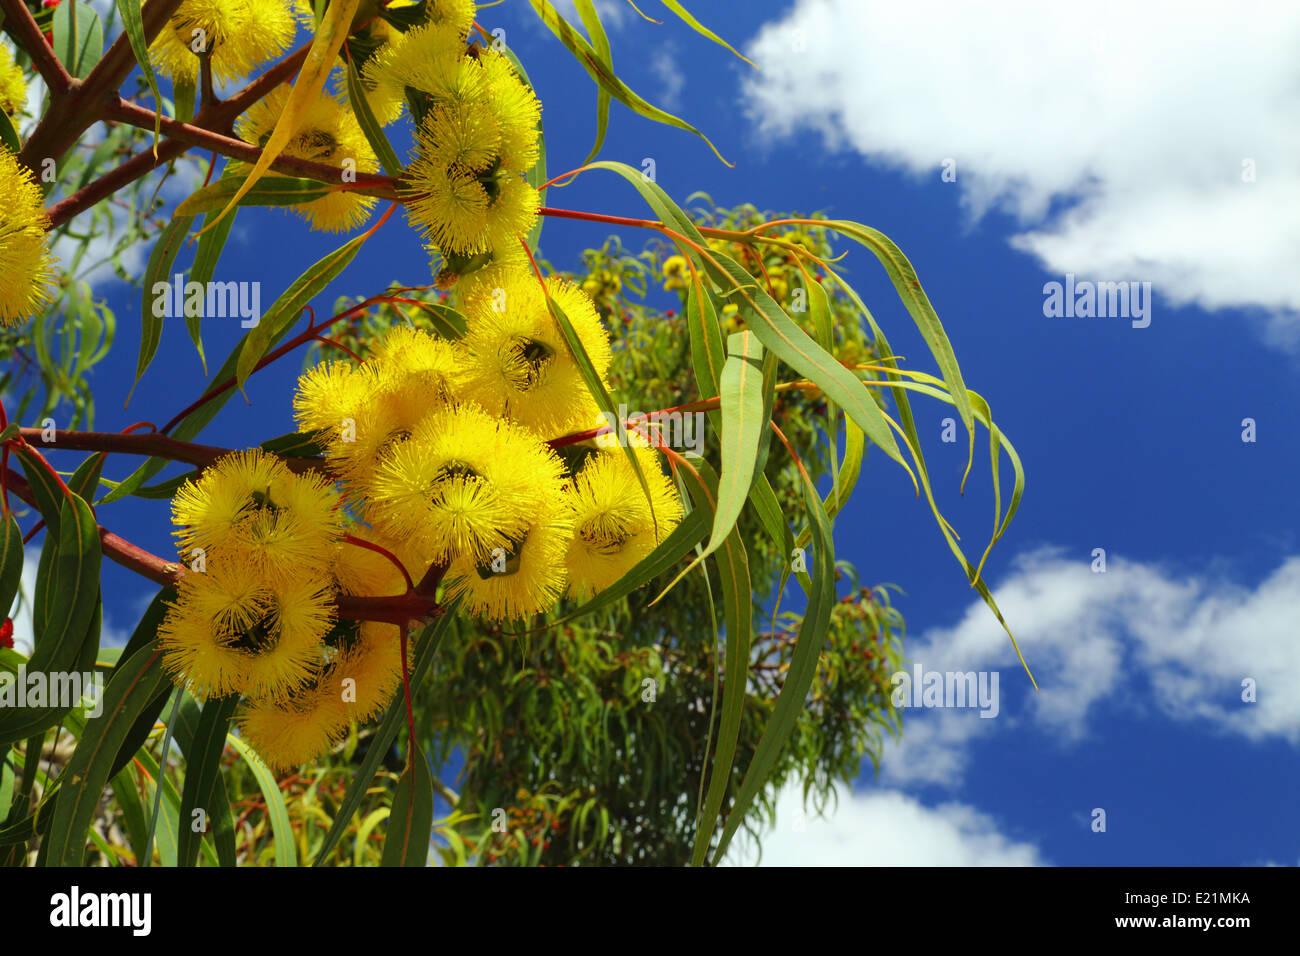 Illyarrie or Red-capped gum displaying yellow flowers in Fremantle, Western Australia. Stock Photo